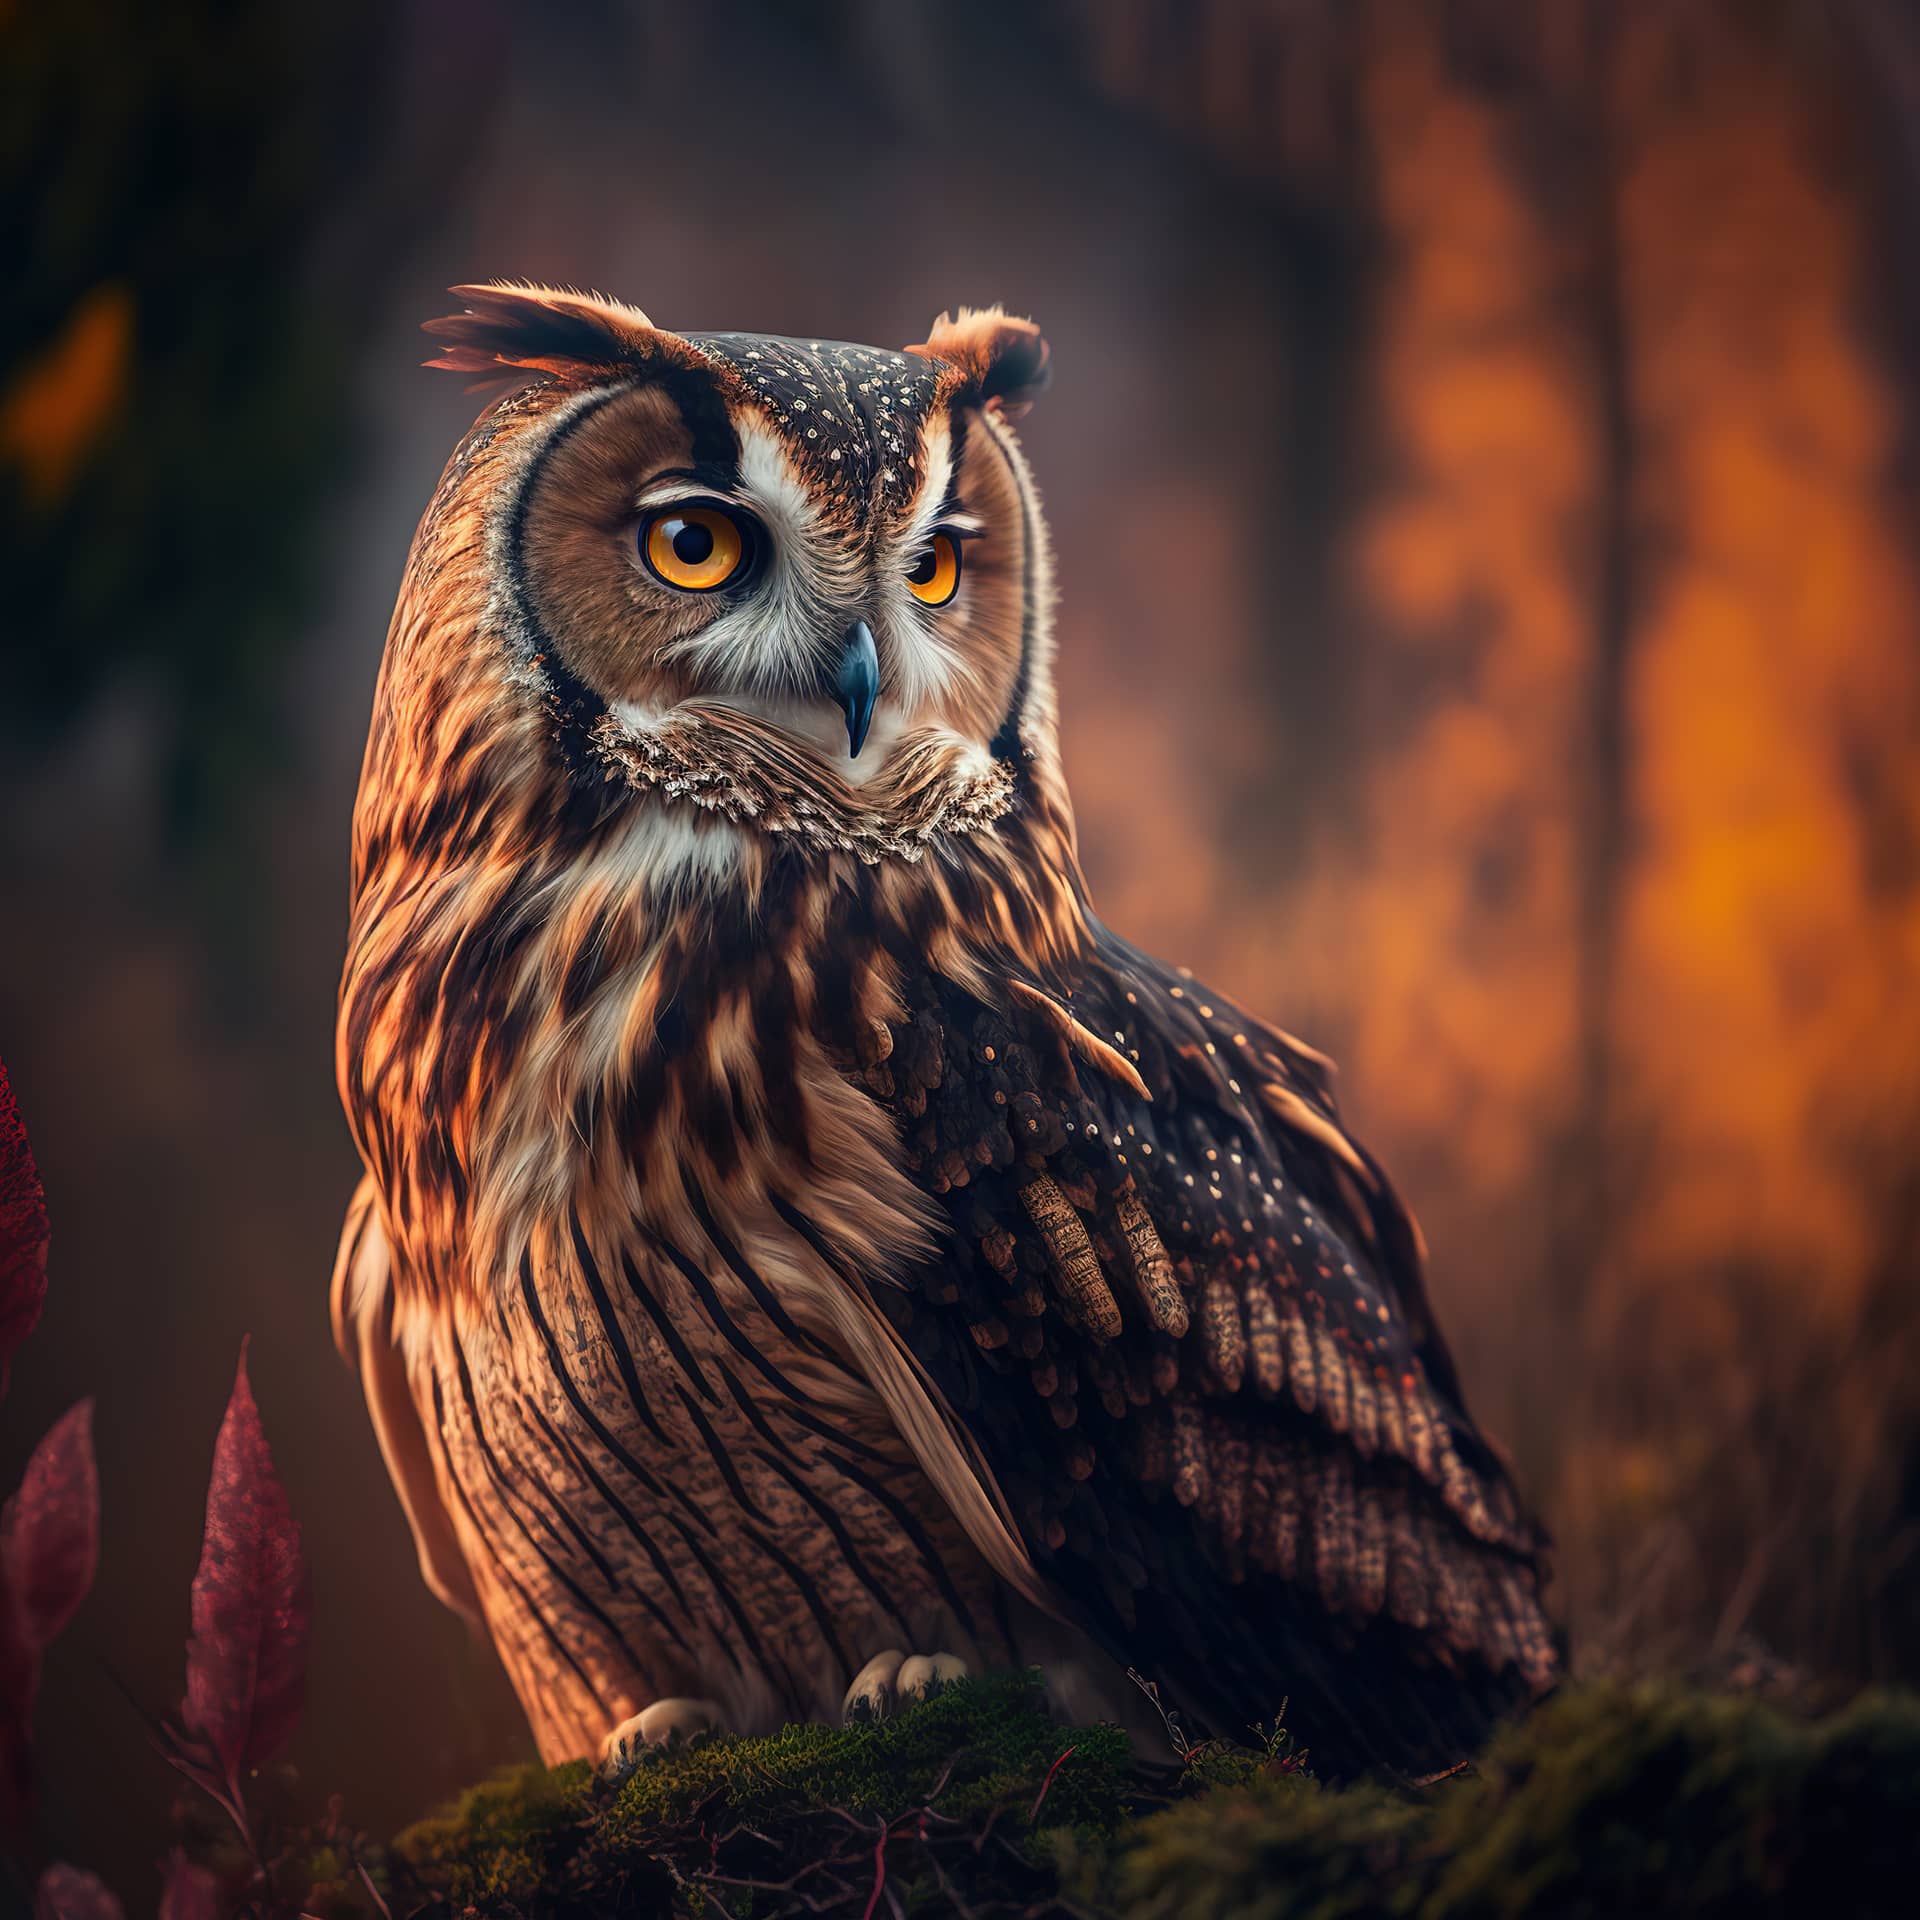 Owl portrait with blurred forest background with empty copy space